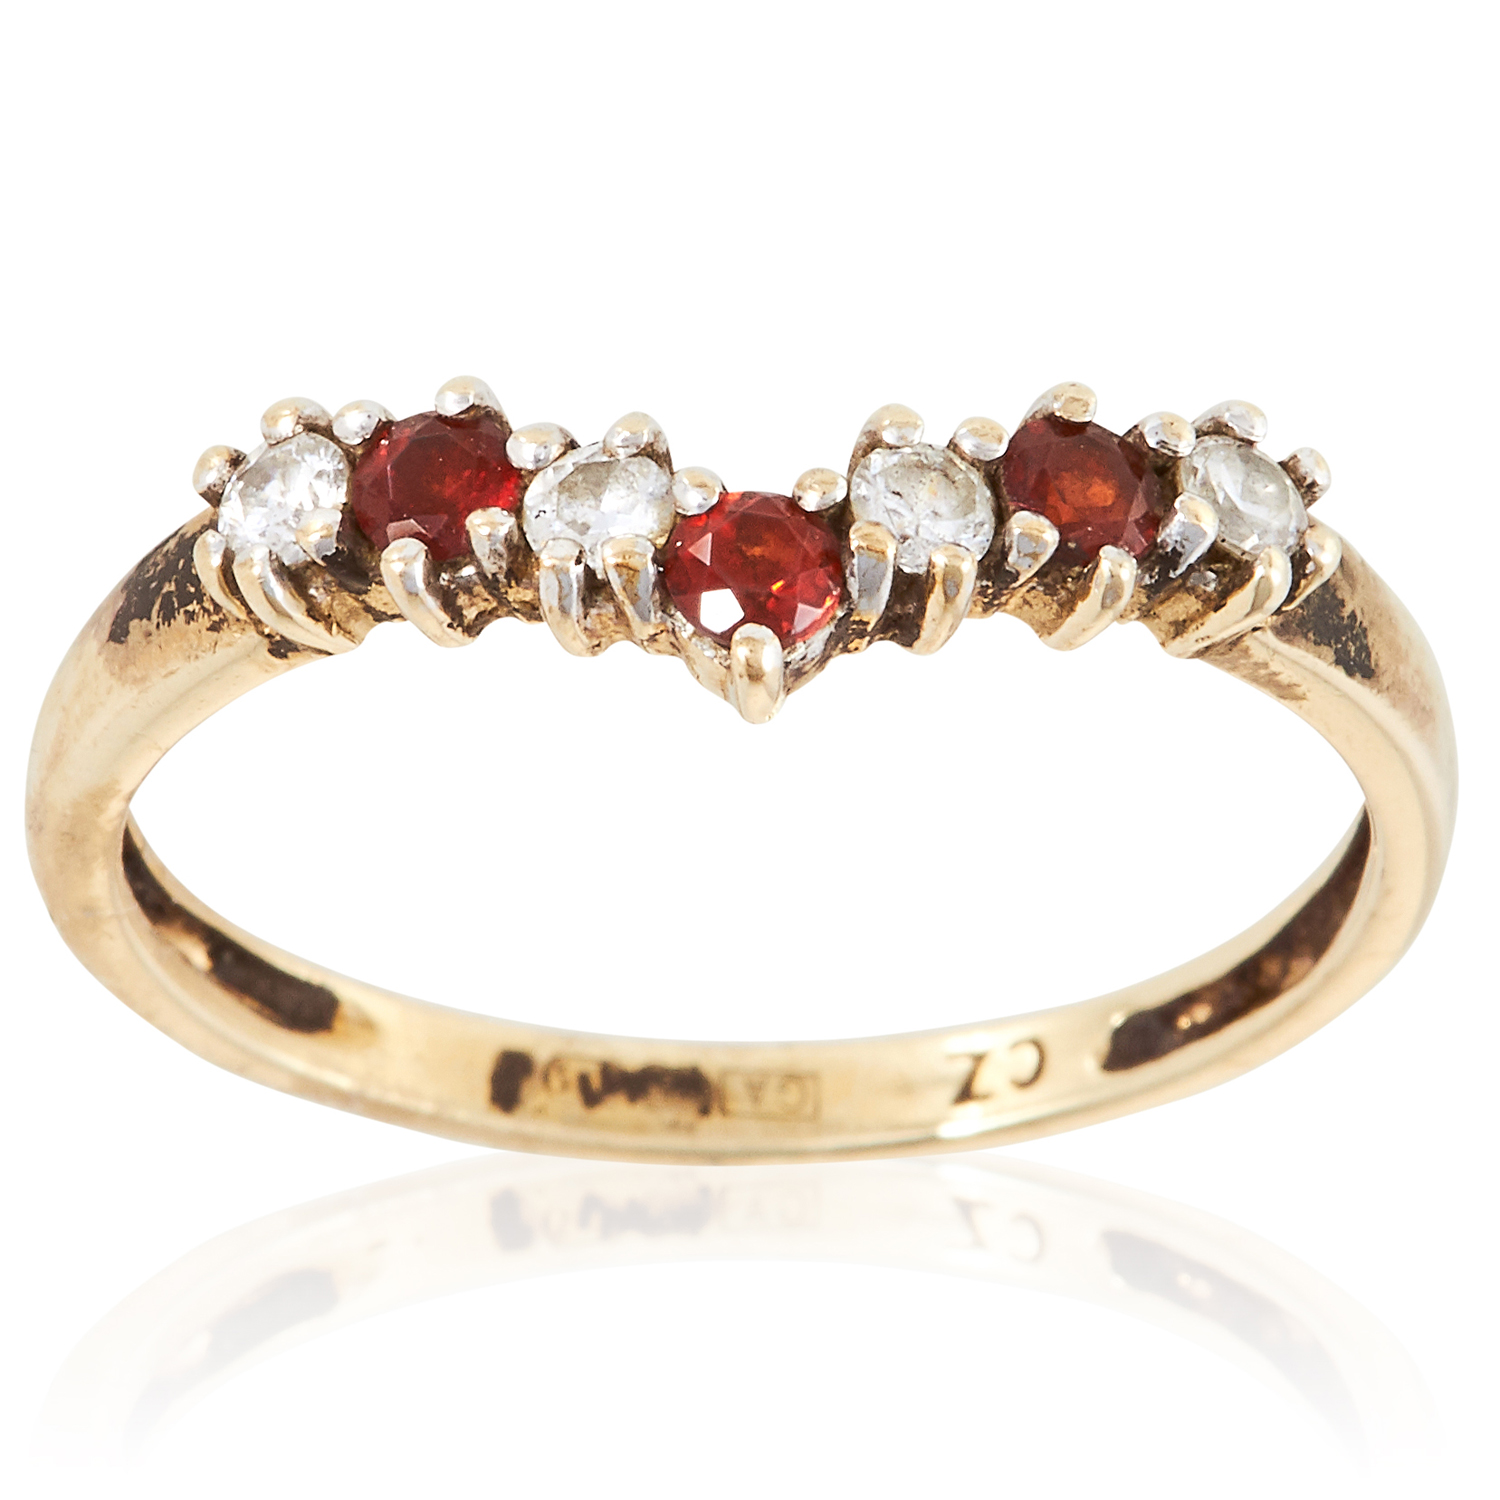 A GEMSET RING in yellow gold, set with alternating round cut red and white gemstones, unmarked, size